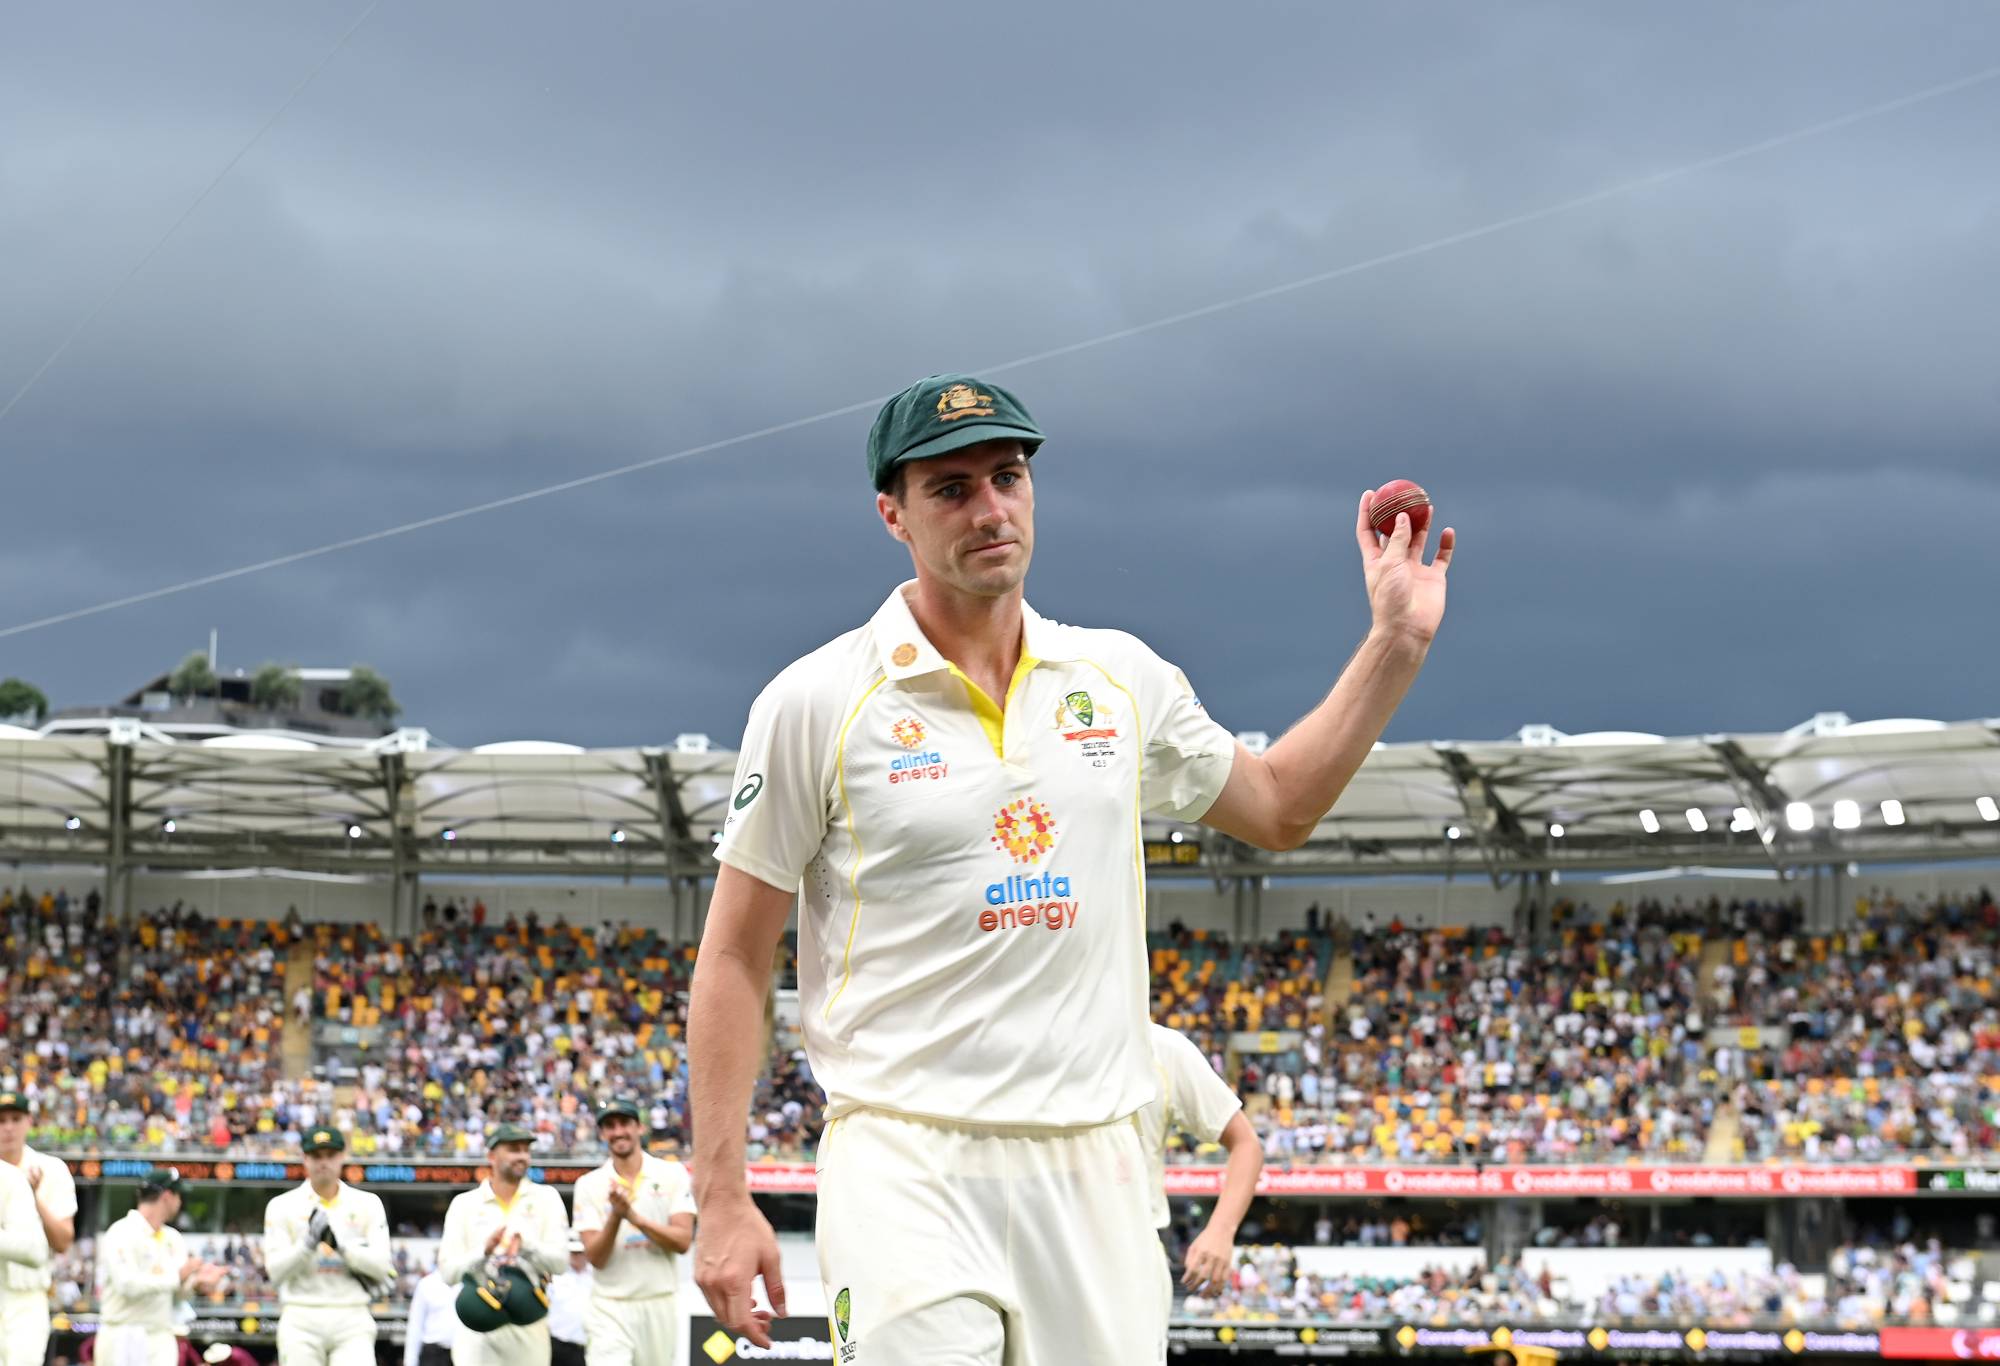 Pat Cummins of Australia holds up the ball after taking five wickets in an innings during day one of the First Test Match in the Ashes series between Australia and England at The Gabba on December 08, 2021 in Brisbane, Australia. (Photo by Bradley Kanaris/Getty Images)